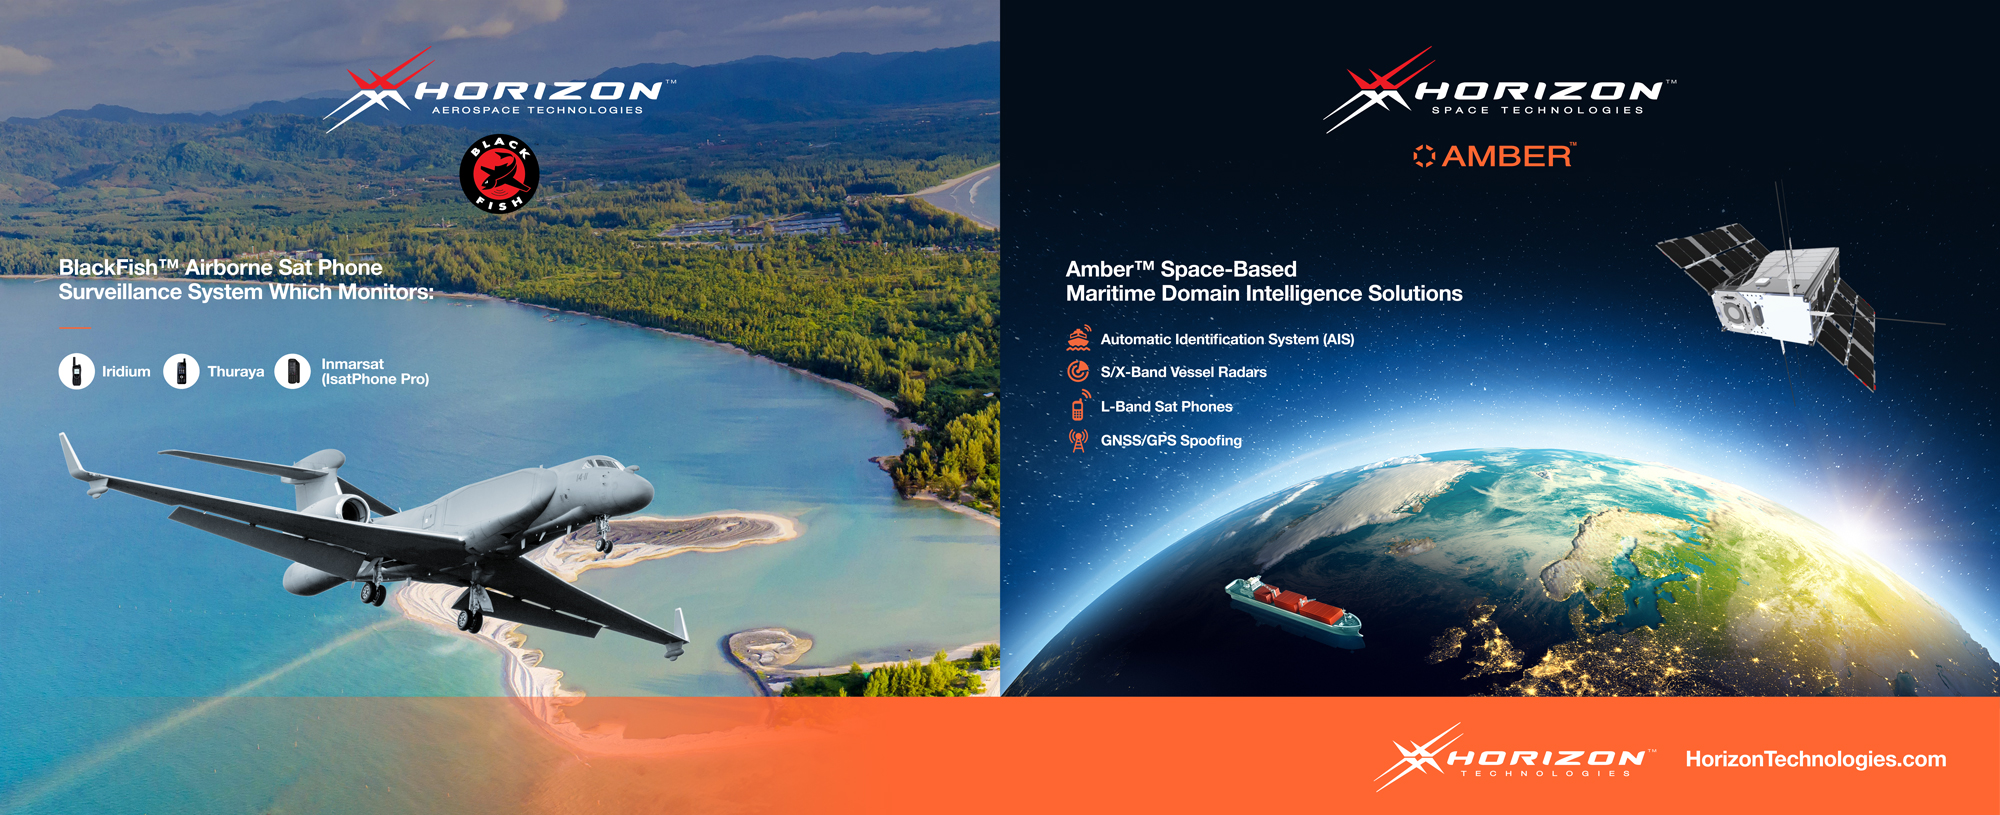 Horizon Technologies Exhibits New BlackFish™ Tri-Band SIGINT System and Amber™ Space-driven Maritime Intelligence Data Service At DSEI, 14-17 September 2021